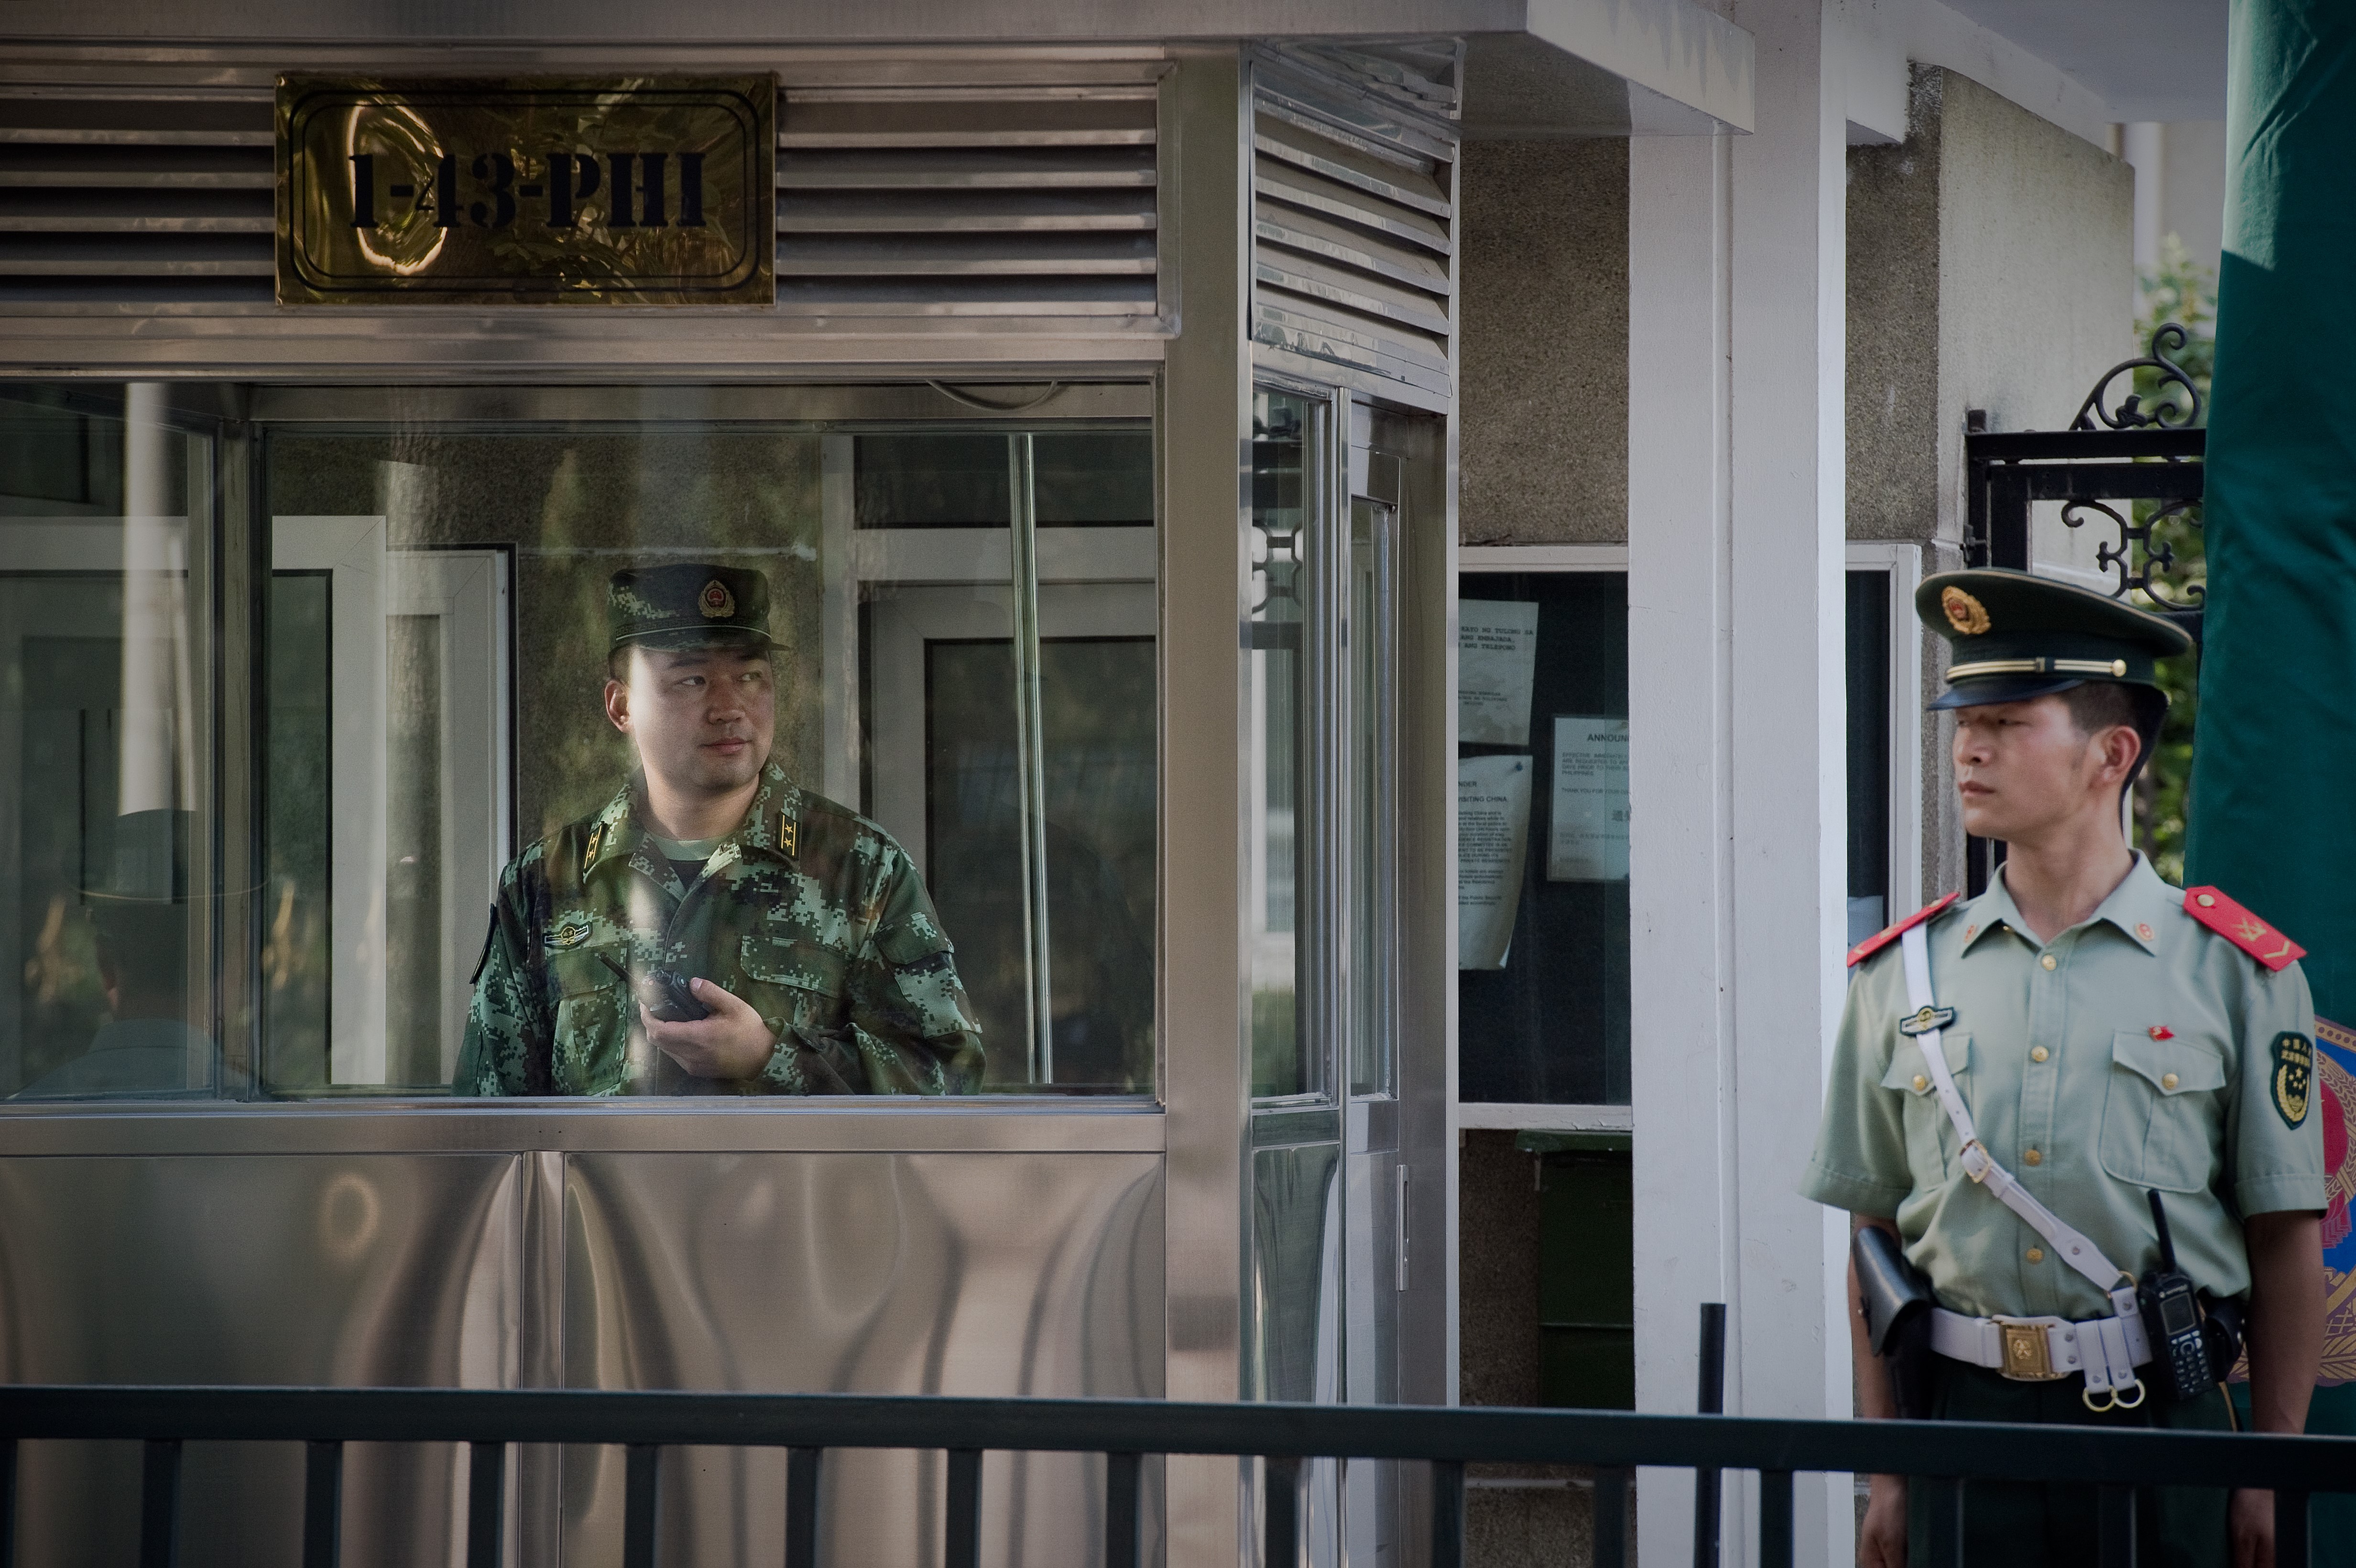 Chinese paramilitary police officers stand guard at the front entrance of the Philippines embassy in Beijing on July 12, 2016. Beijing "does not accept and does not recognise" the ruling by a UN-backed tribunal on its dispute with the Philippines over the South China Sea, the foreign ministry said on July 12. / AFP PHOTO / NICOLAS ASFOURI